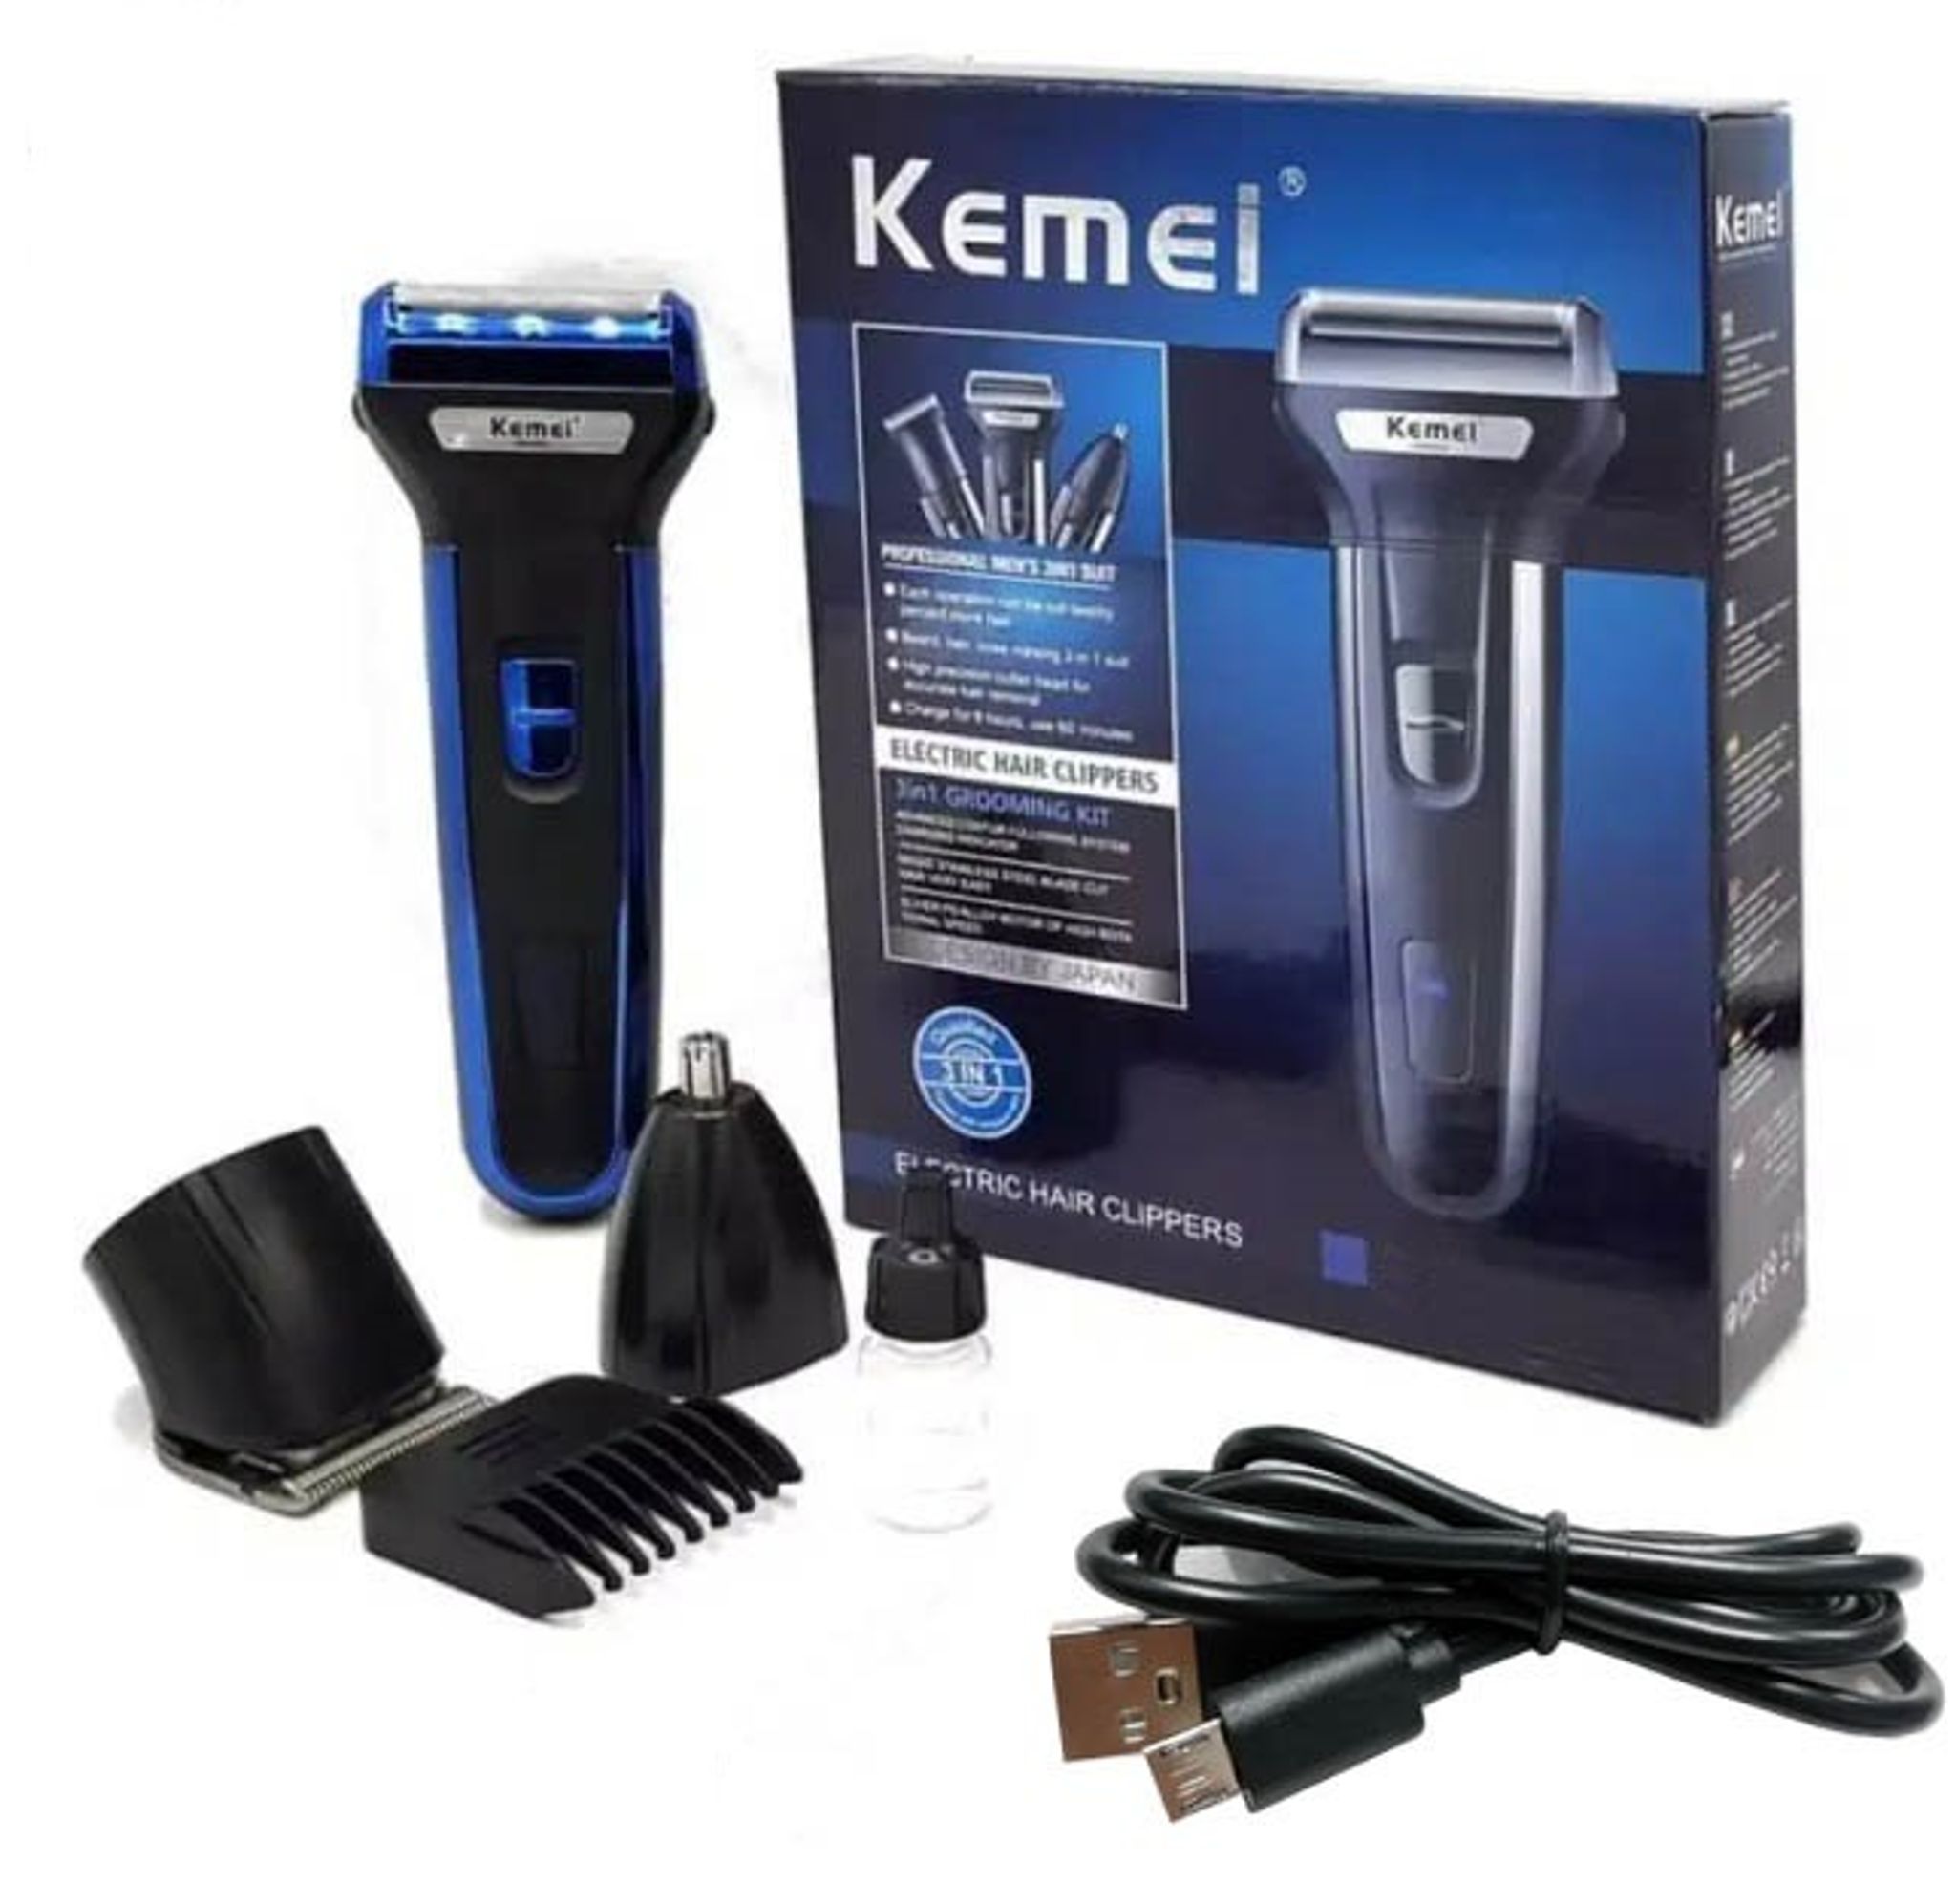 Kemei Electronic Professional Hair Clipper 3 In 1 Suit KM-6333 - 1Sell